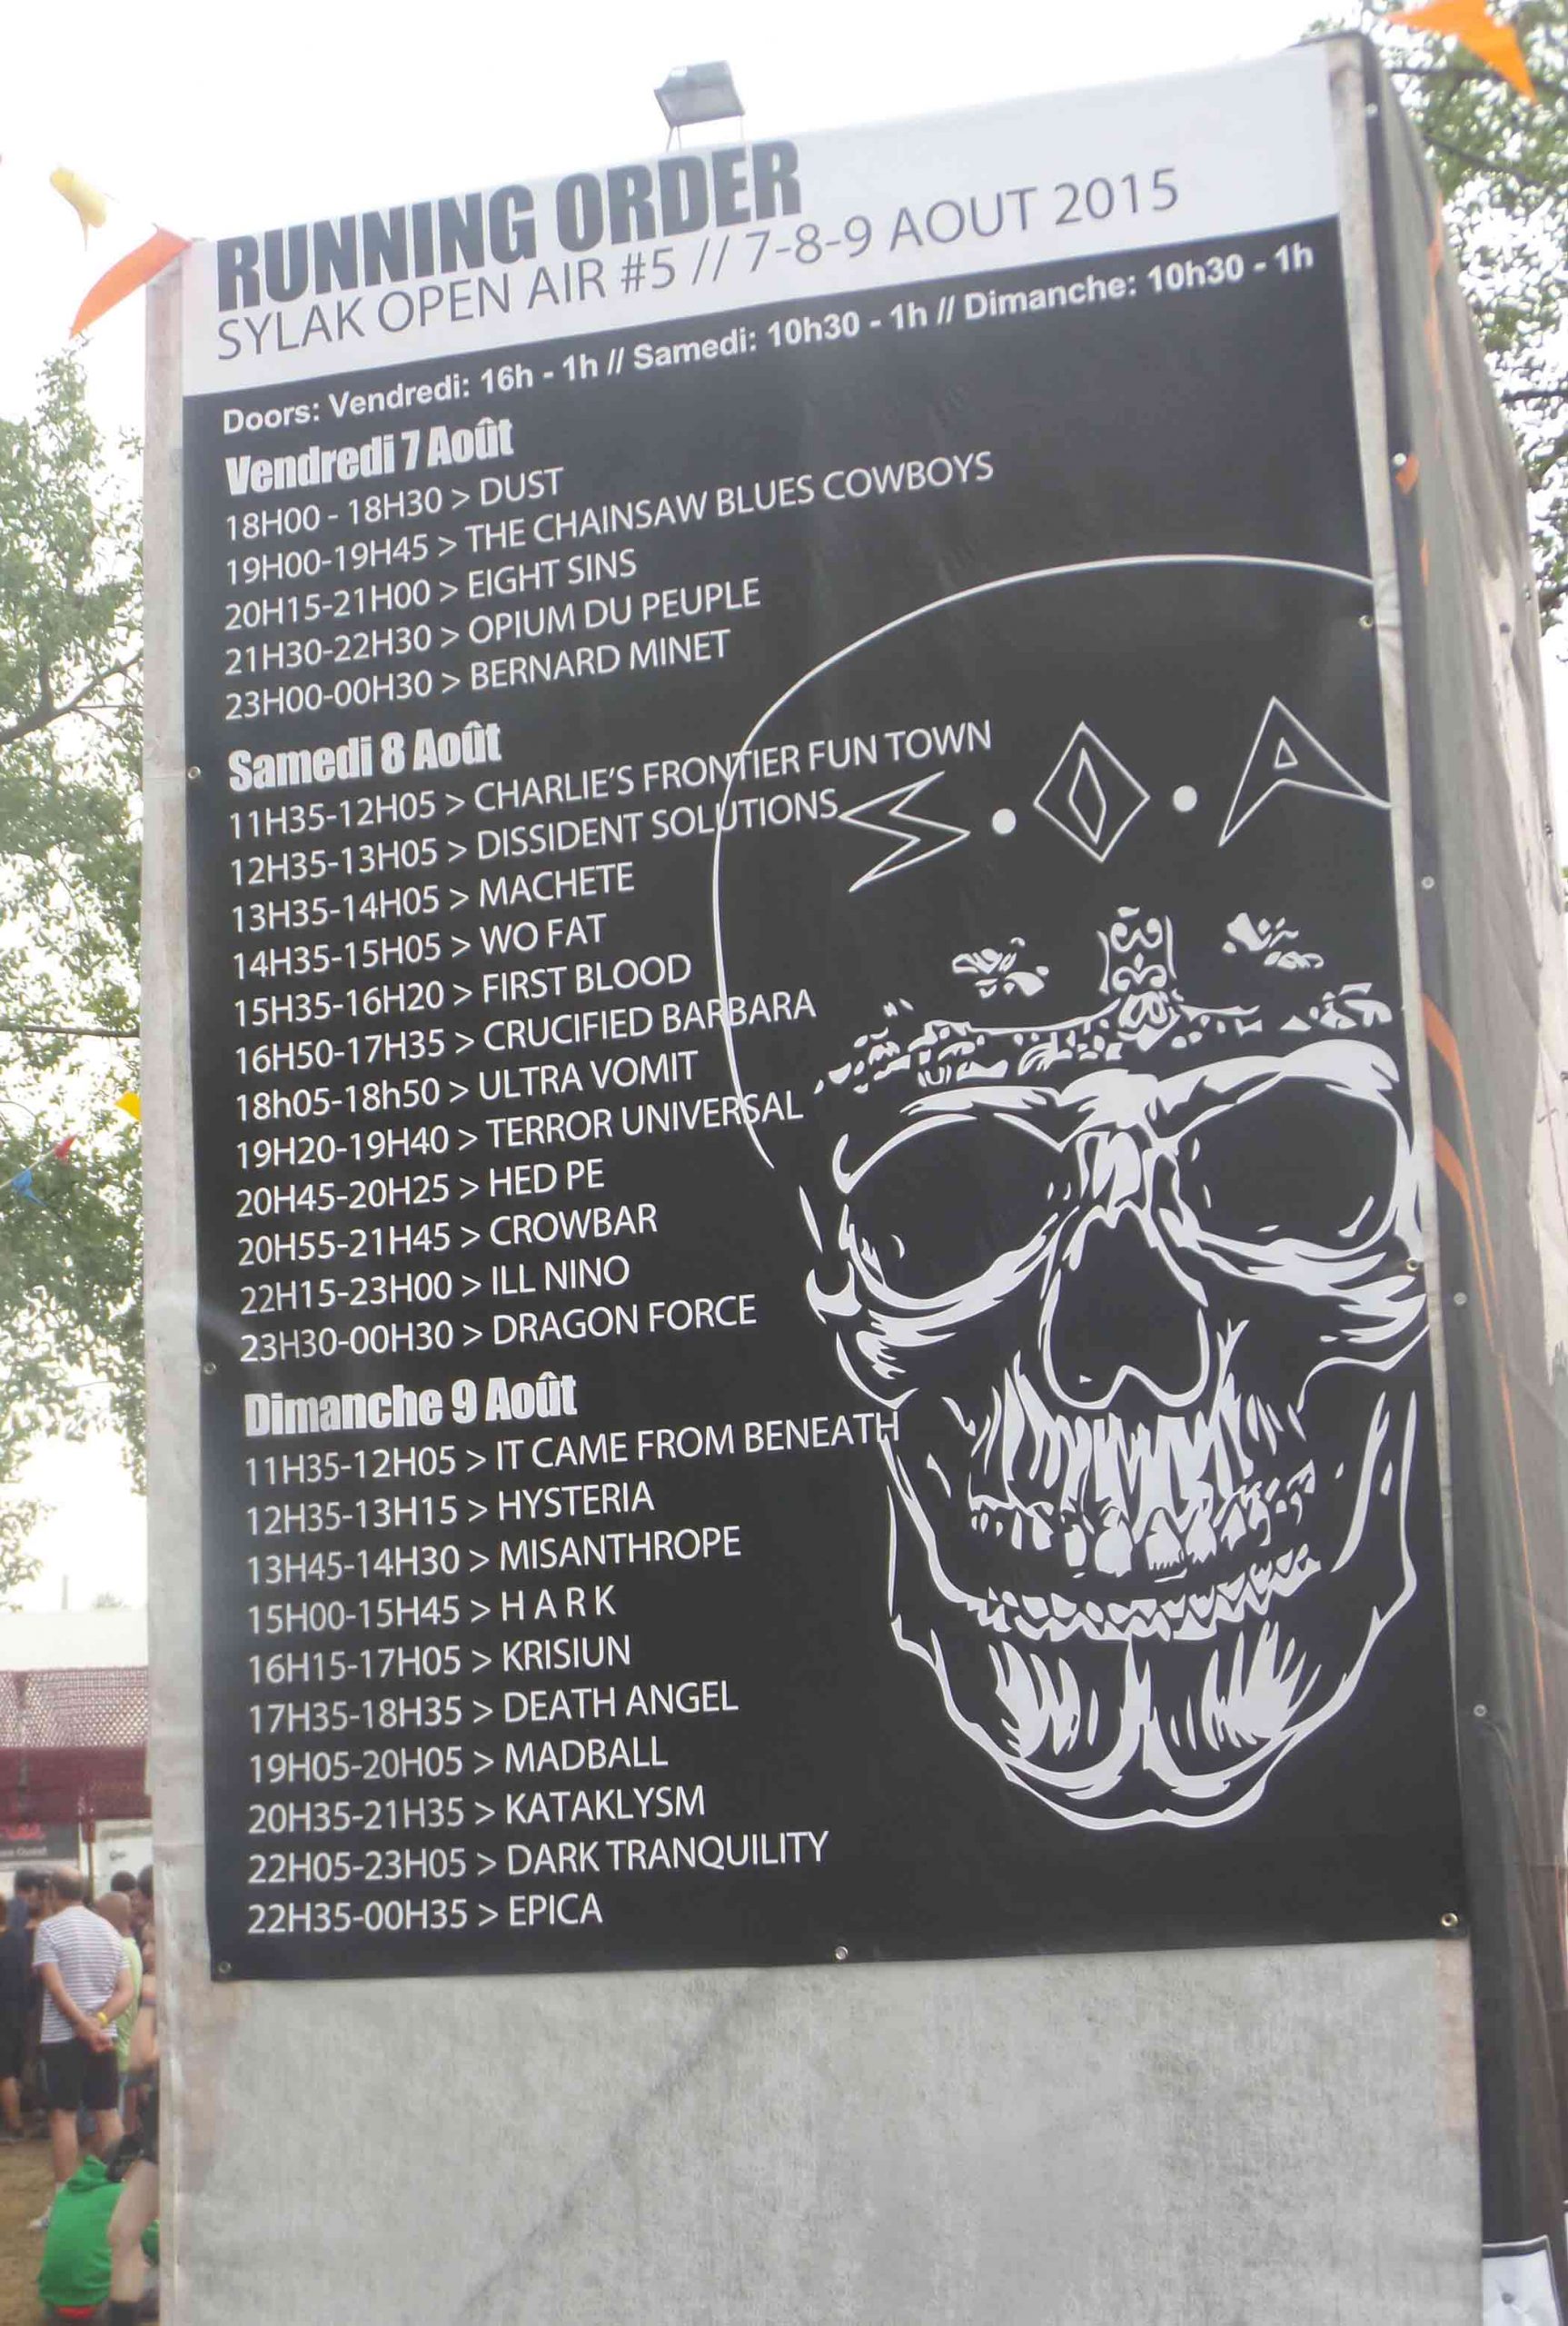 Sylak Festival Poster with Times